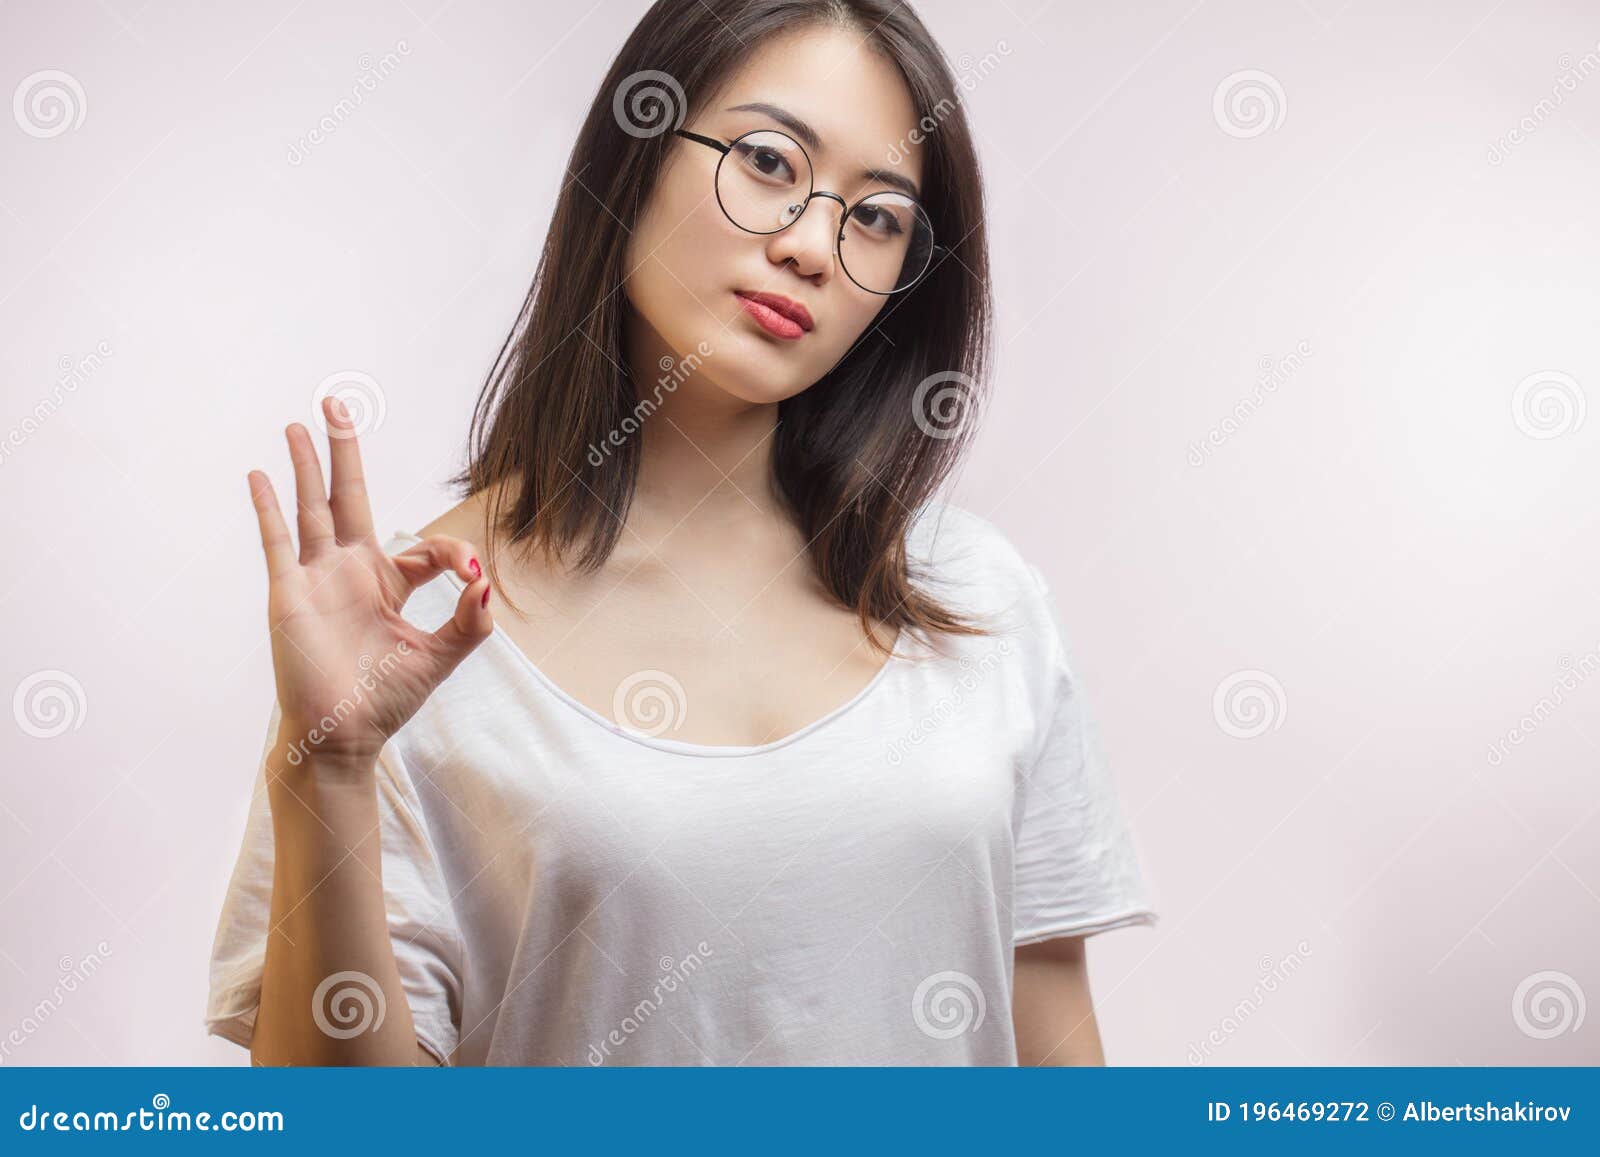 Asian girl with glasses